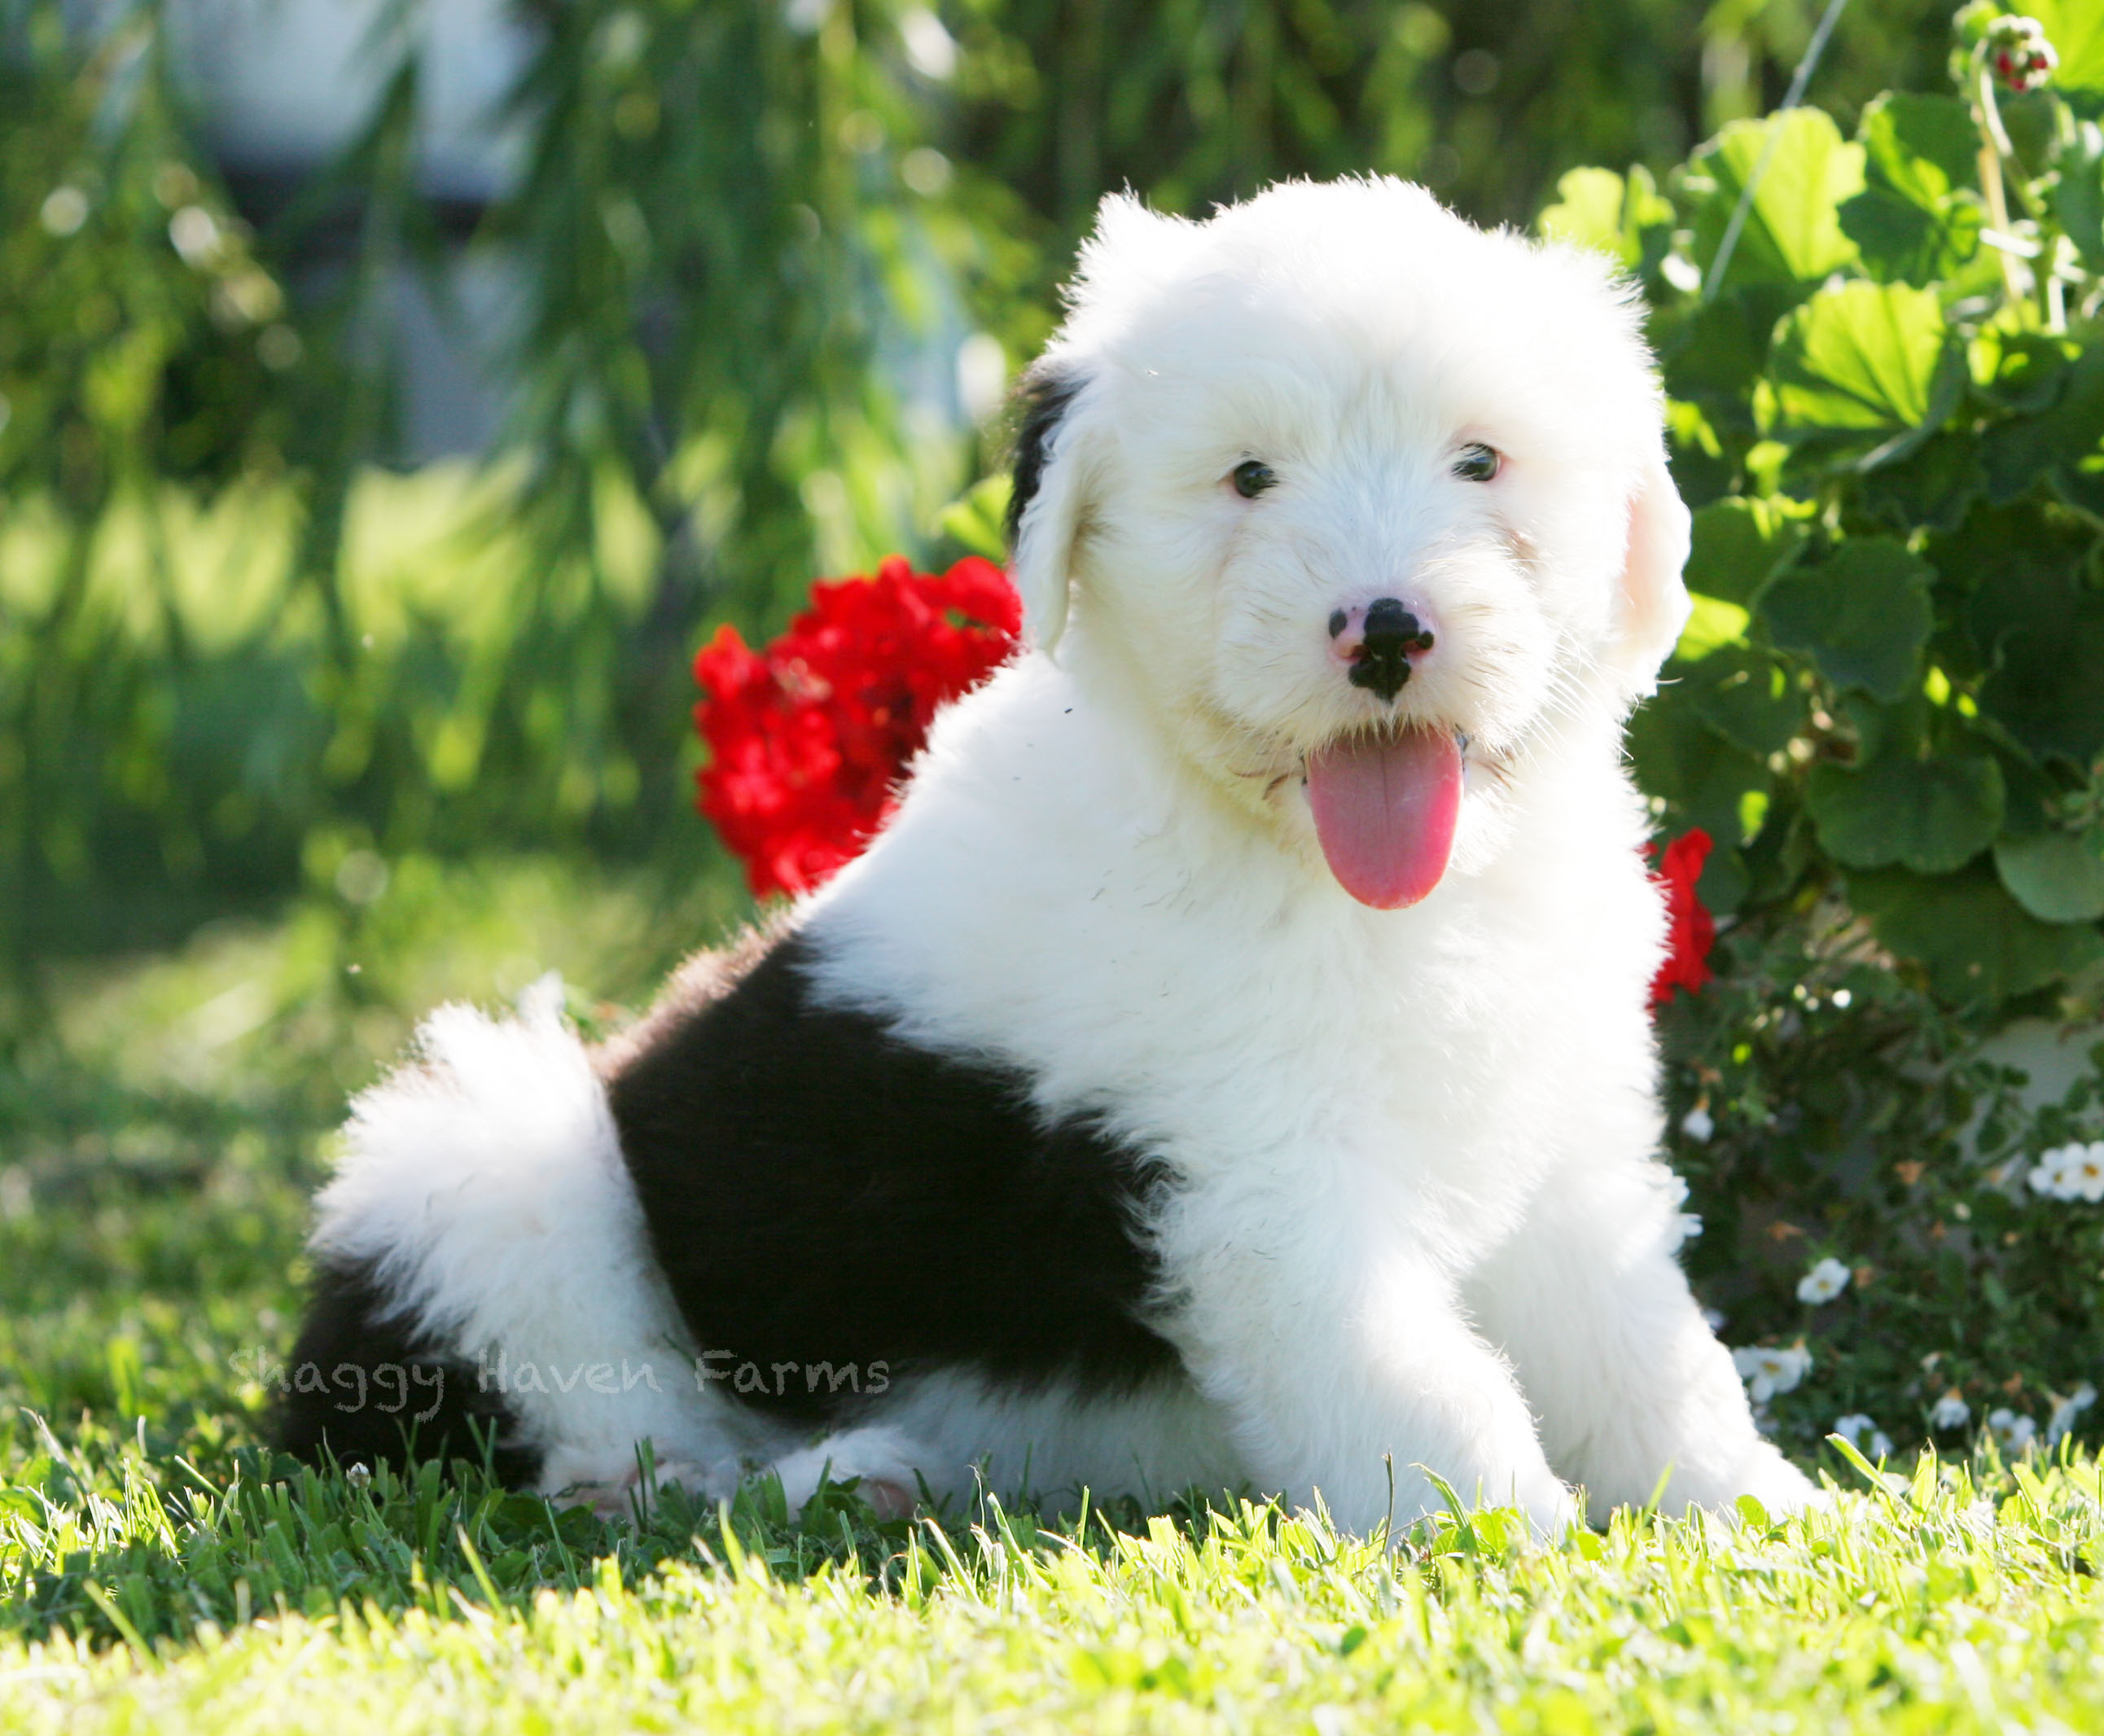 Old English Sheepdog with a flower photo and wallpaper. Beautiful